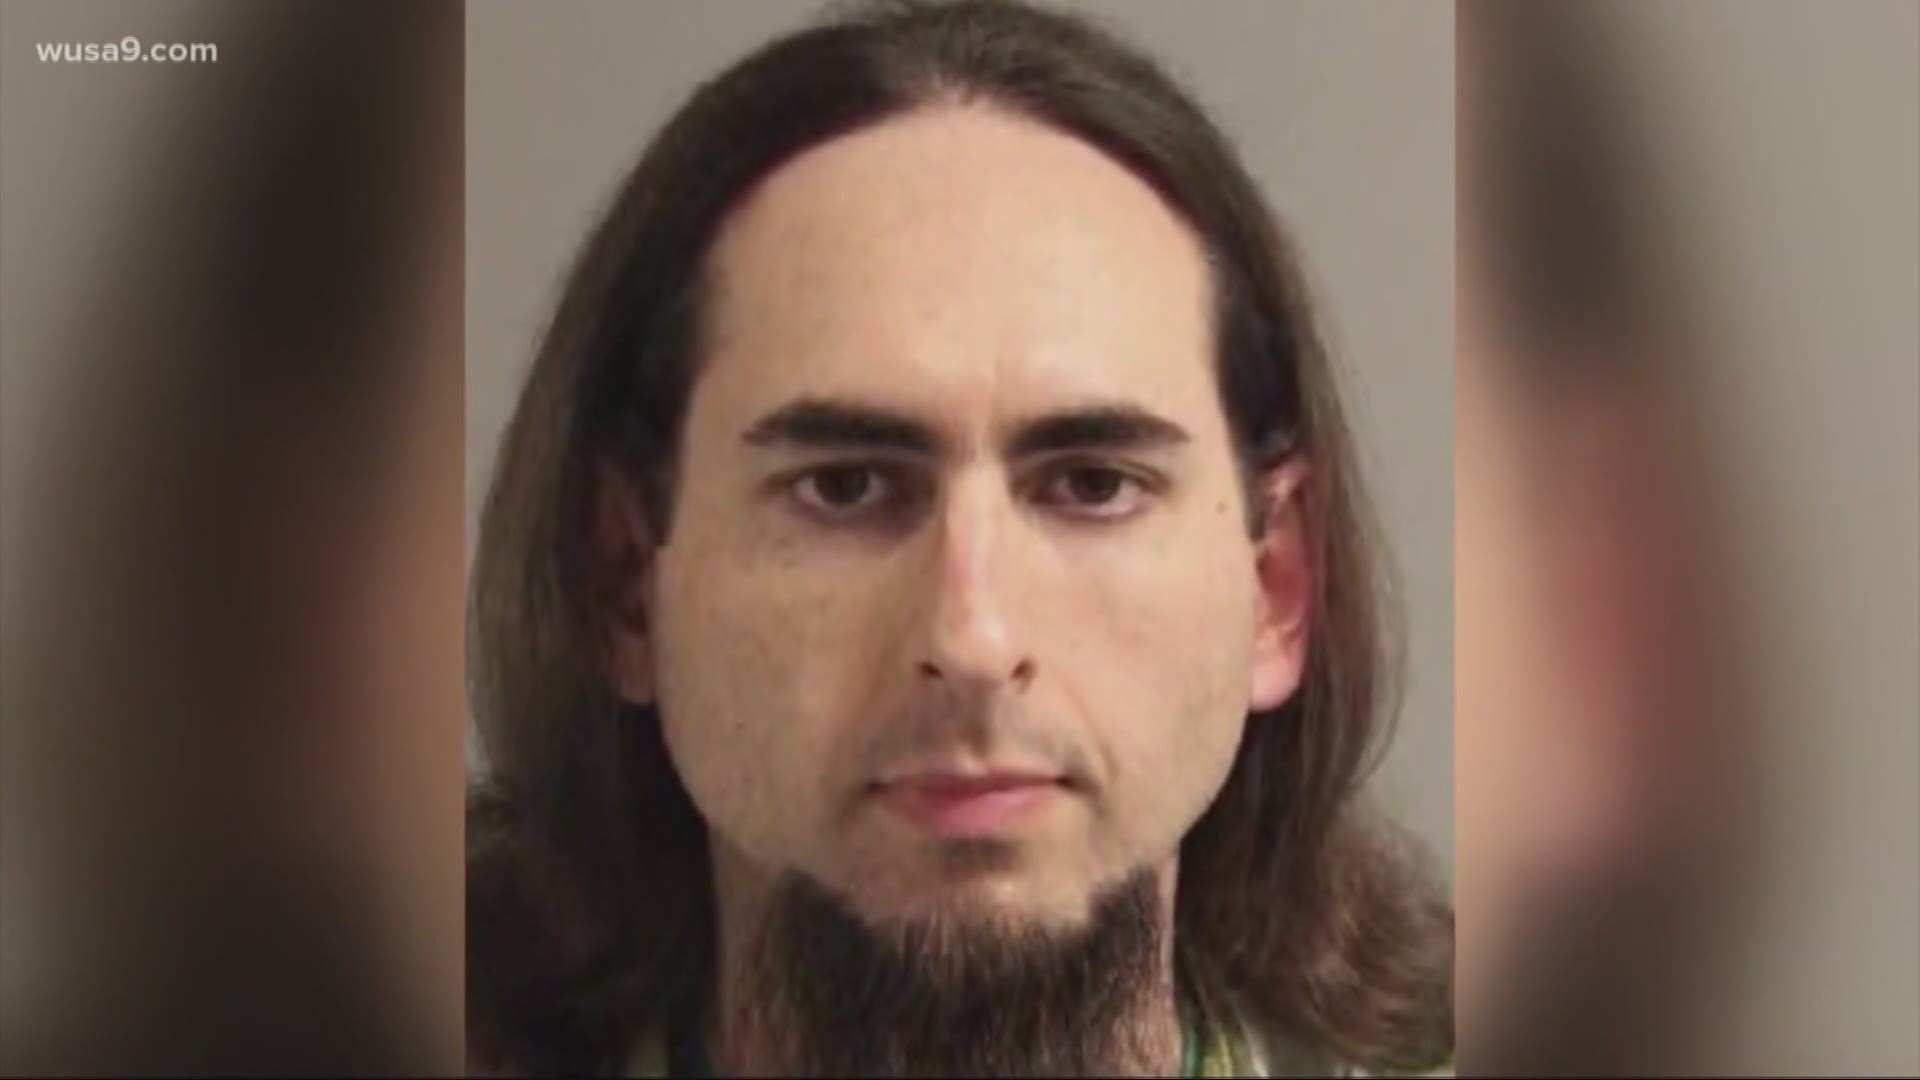 A judge in Annapolis has received the mental health evaluation of murder suspect Jarrod Ramos.
She has placed that report under seal. Ramos faces trial in November for killing five people last summer at the Capital Gazette newspaper. He has pleaded not guilty and not criminally responsible, which is Maryland's version of an insanity defense.